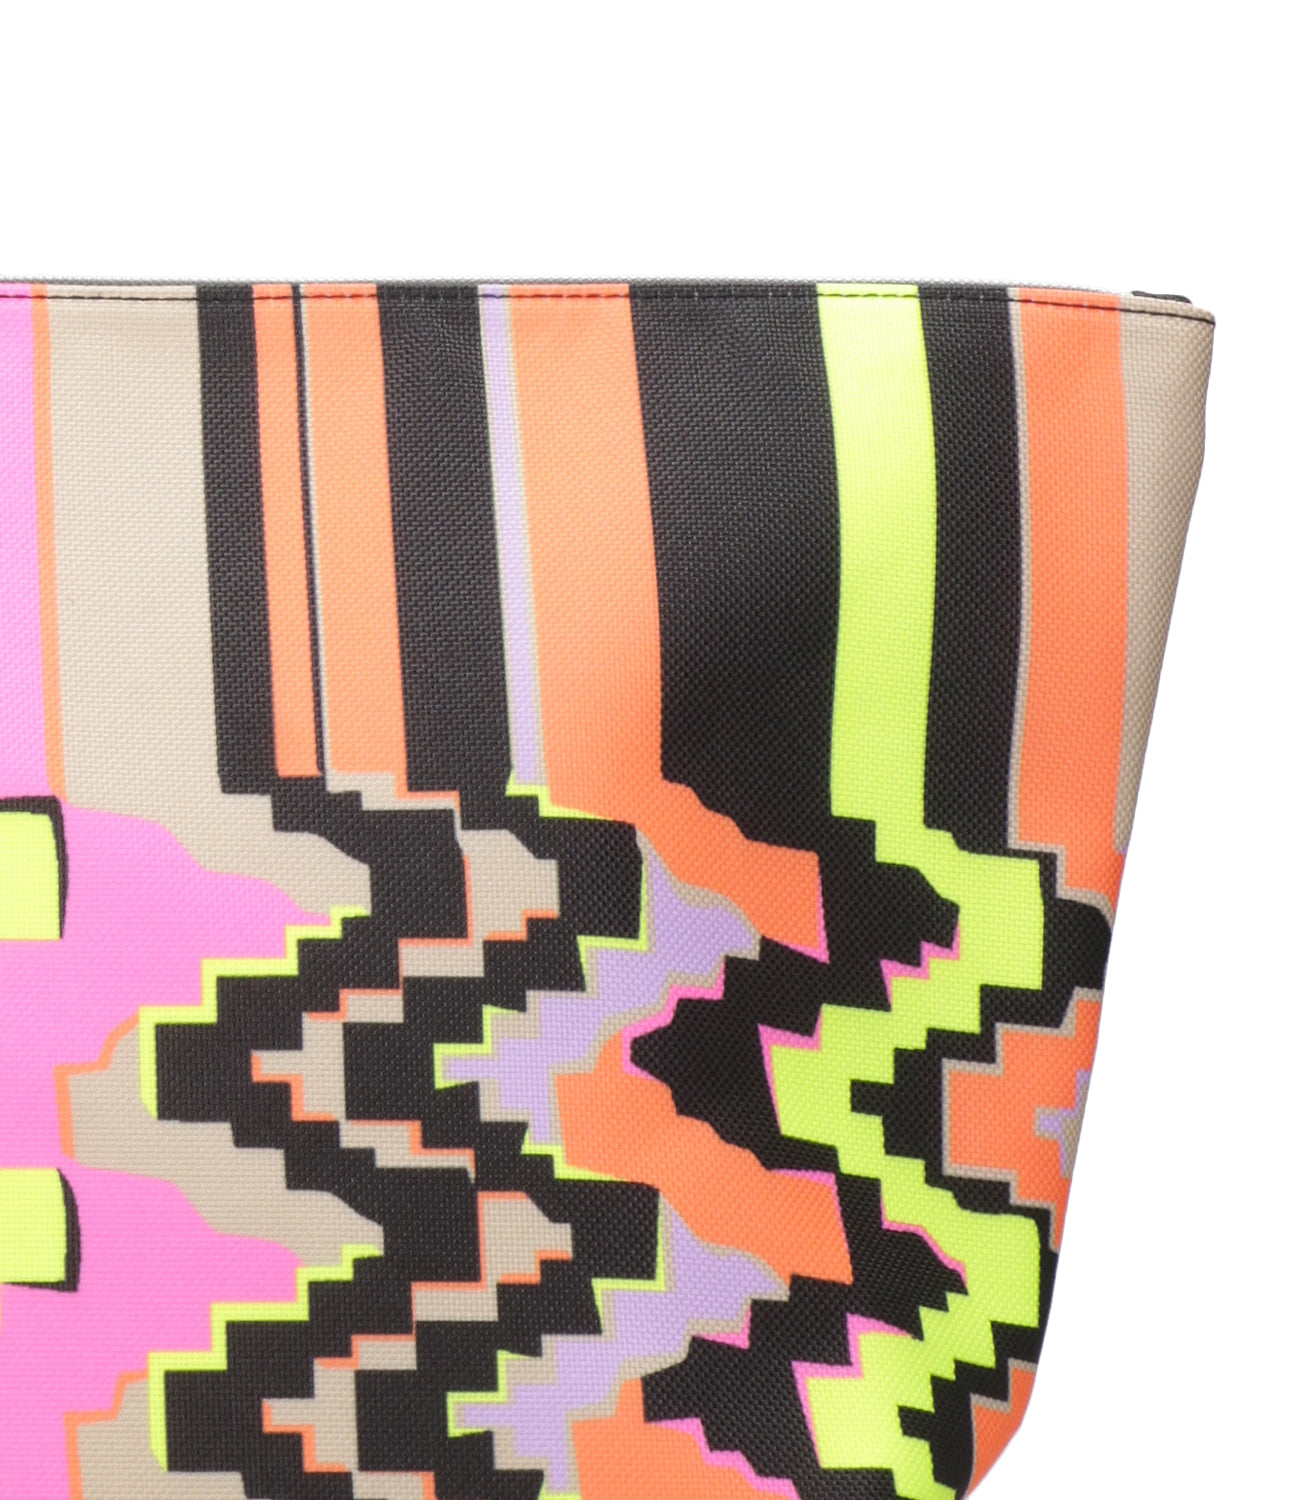 F**K Project | Fuxia and Yellow Maxi Clutch Bag